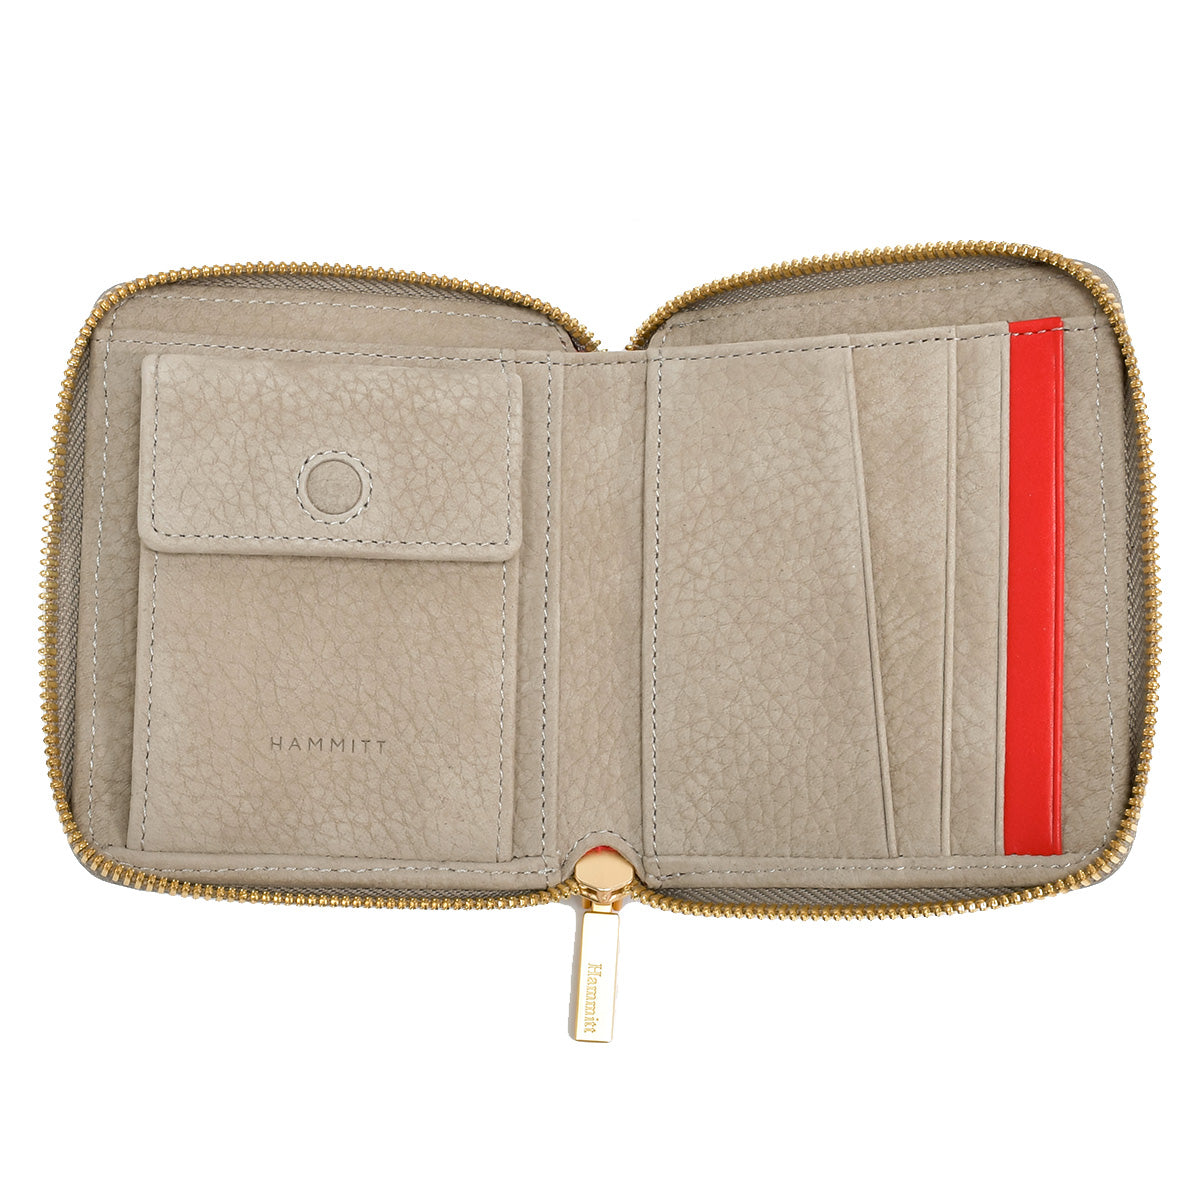 Hammitt 5 North Compact Leather Wallet grey natural/brushed gold